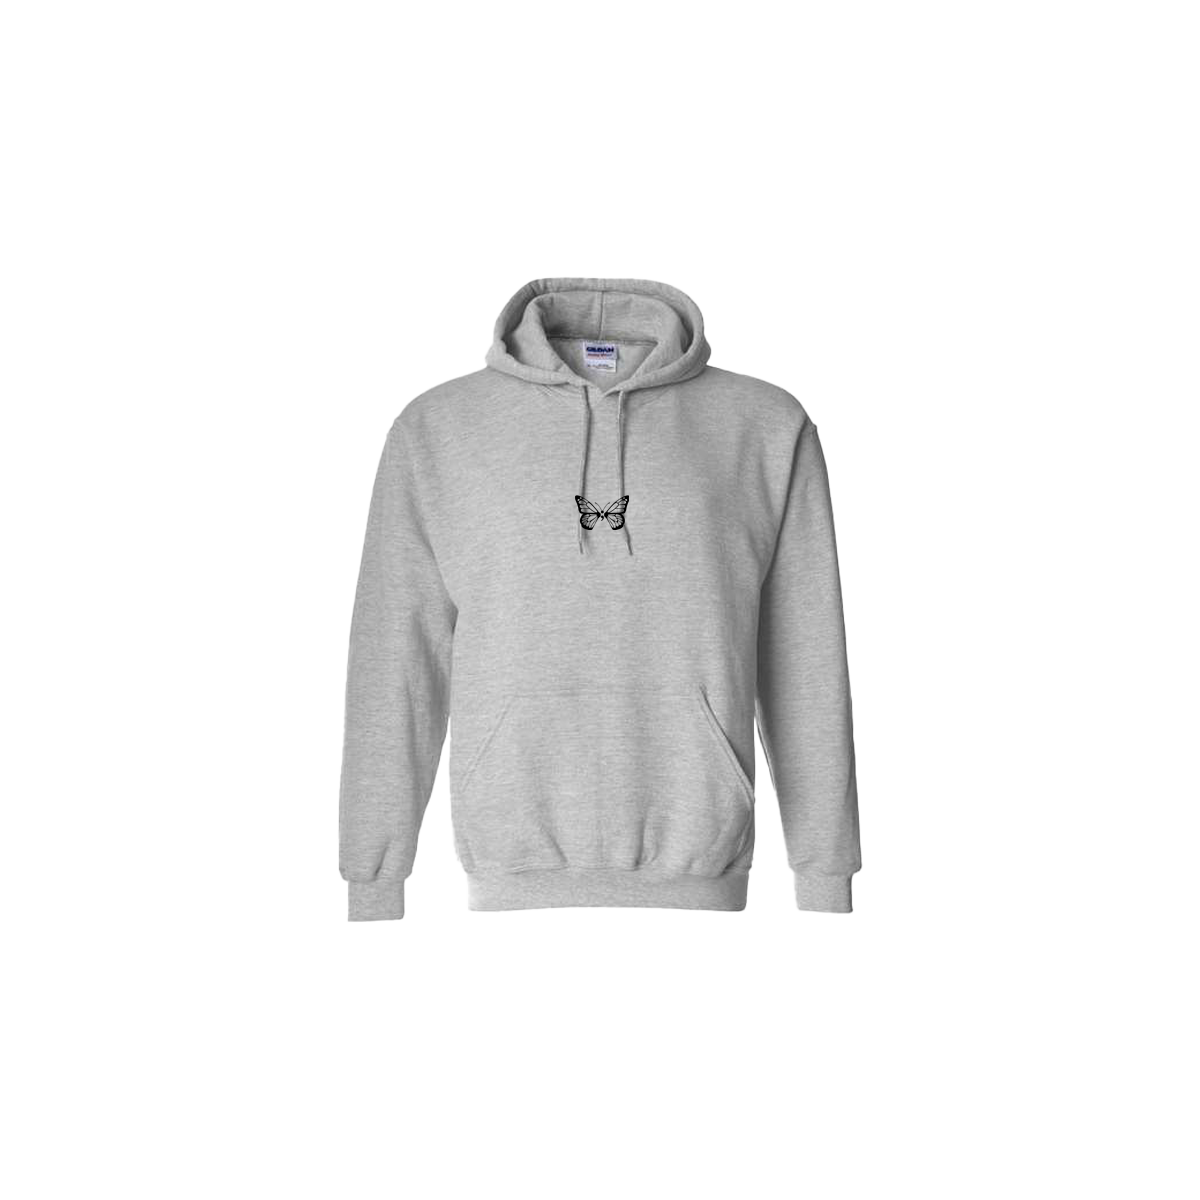 Butterfly Embroidered Grey Hoodie - Mental Health Awareness Clothing